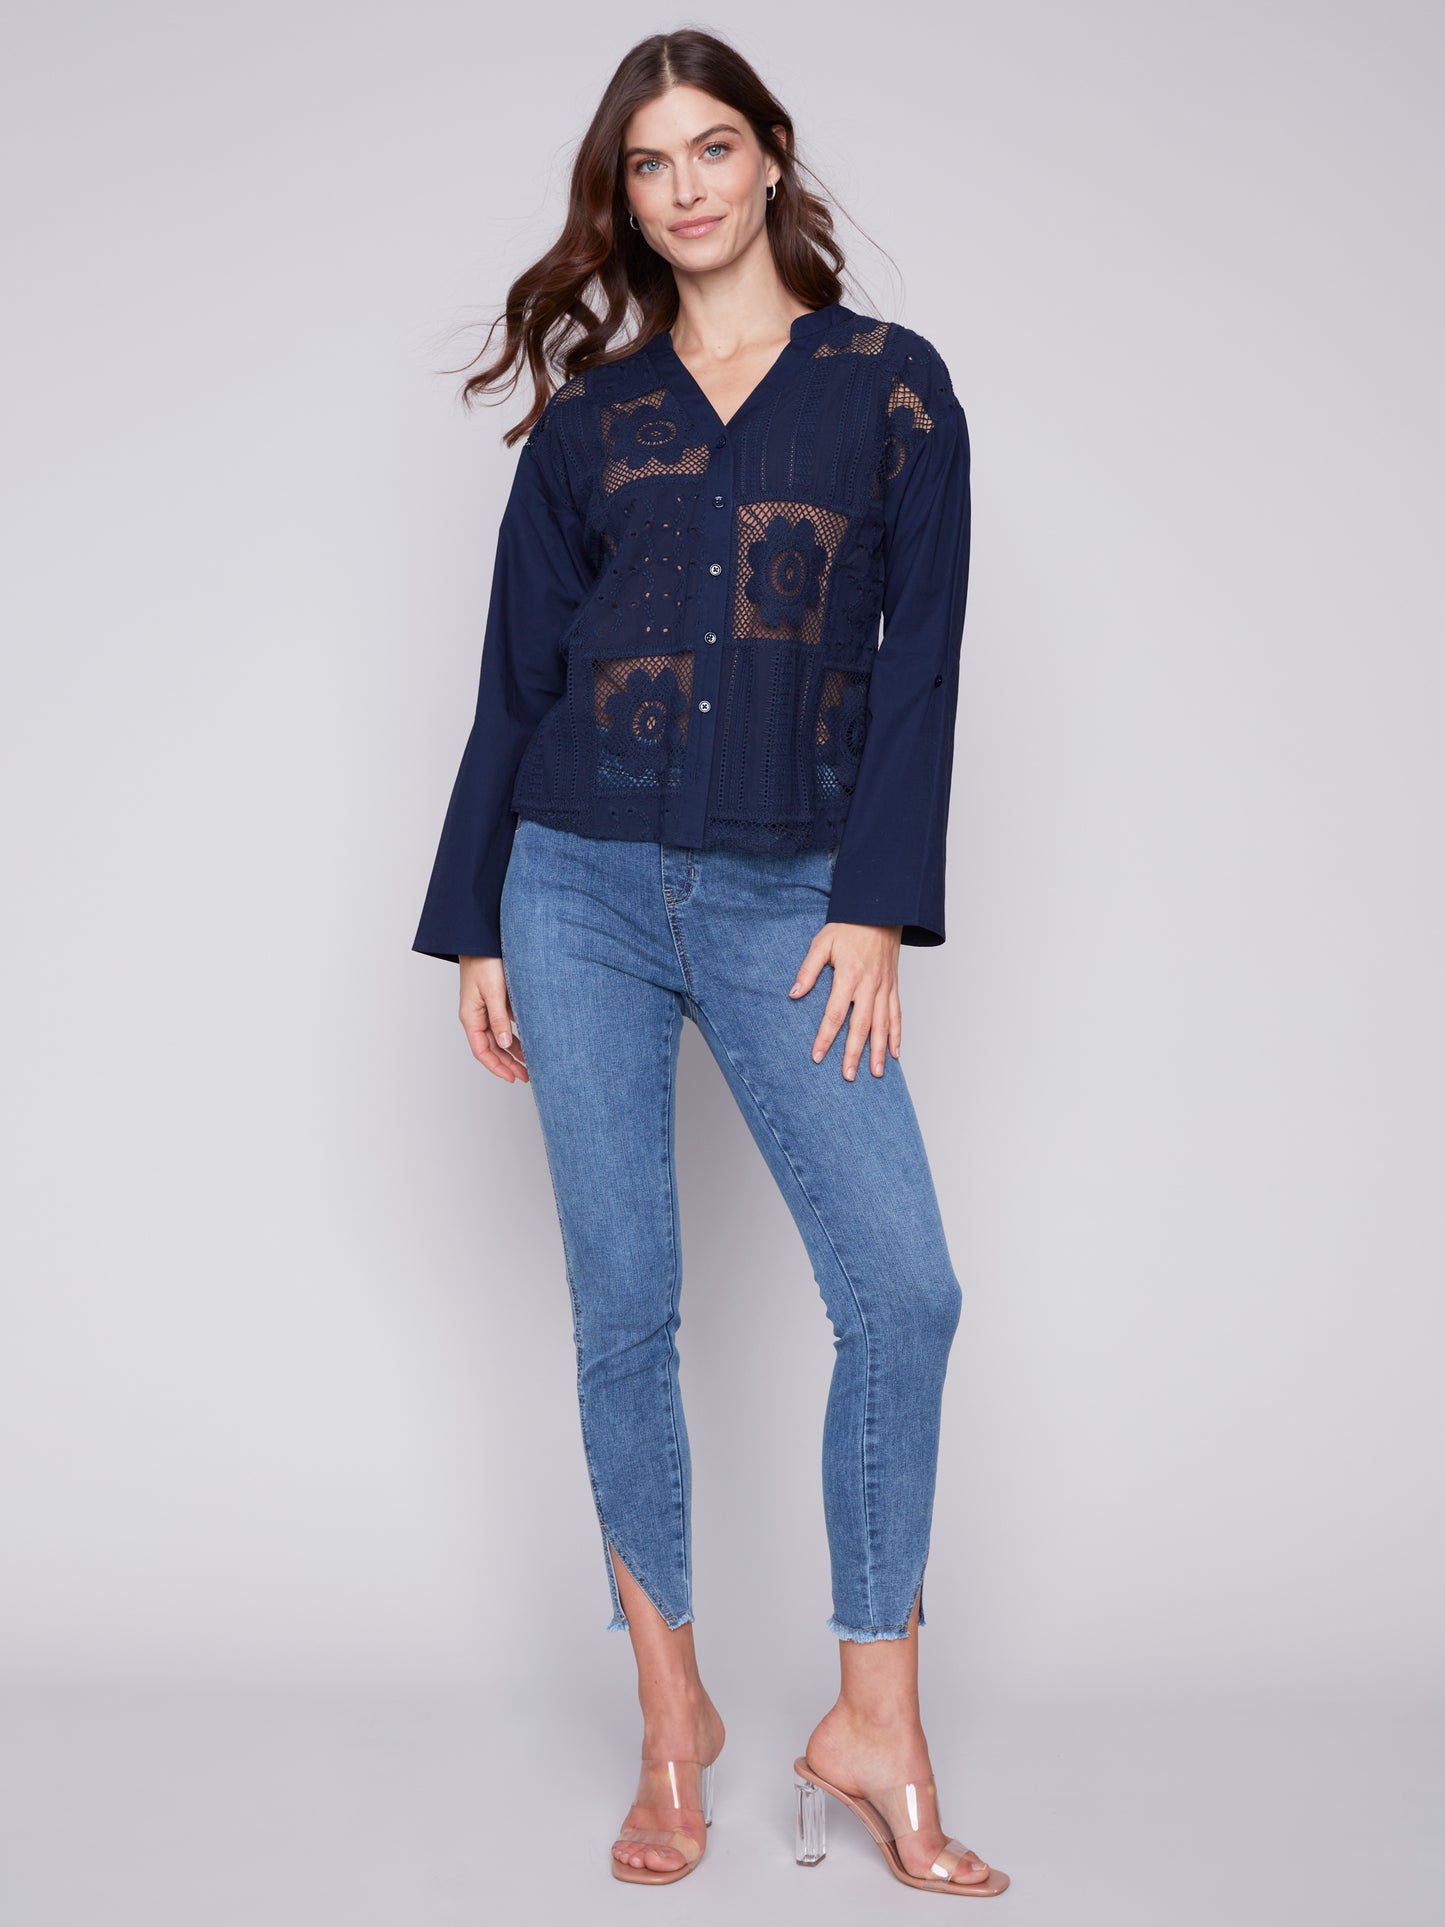 Long Sleeve Eyelet Shirt with Buttons in Marine Navy by Charlie B